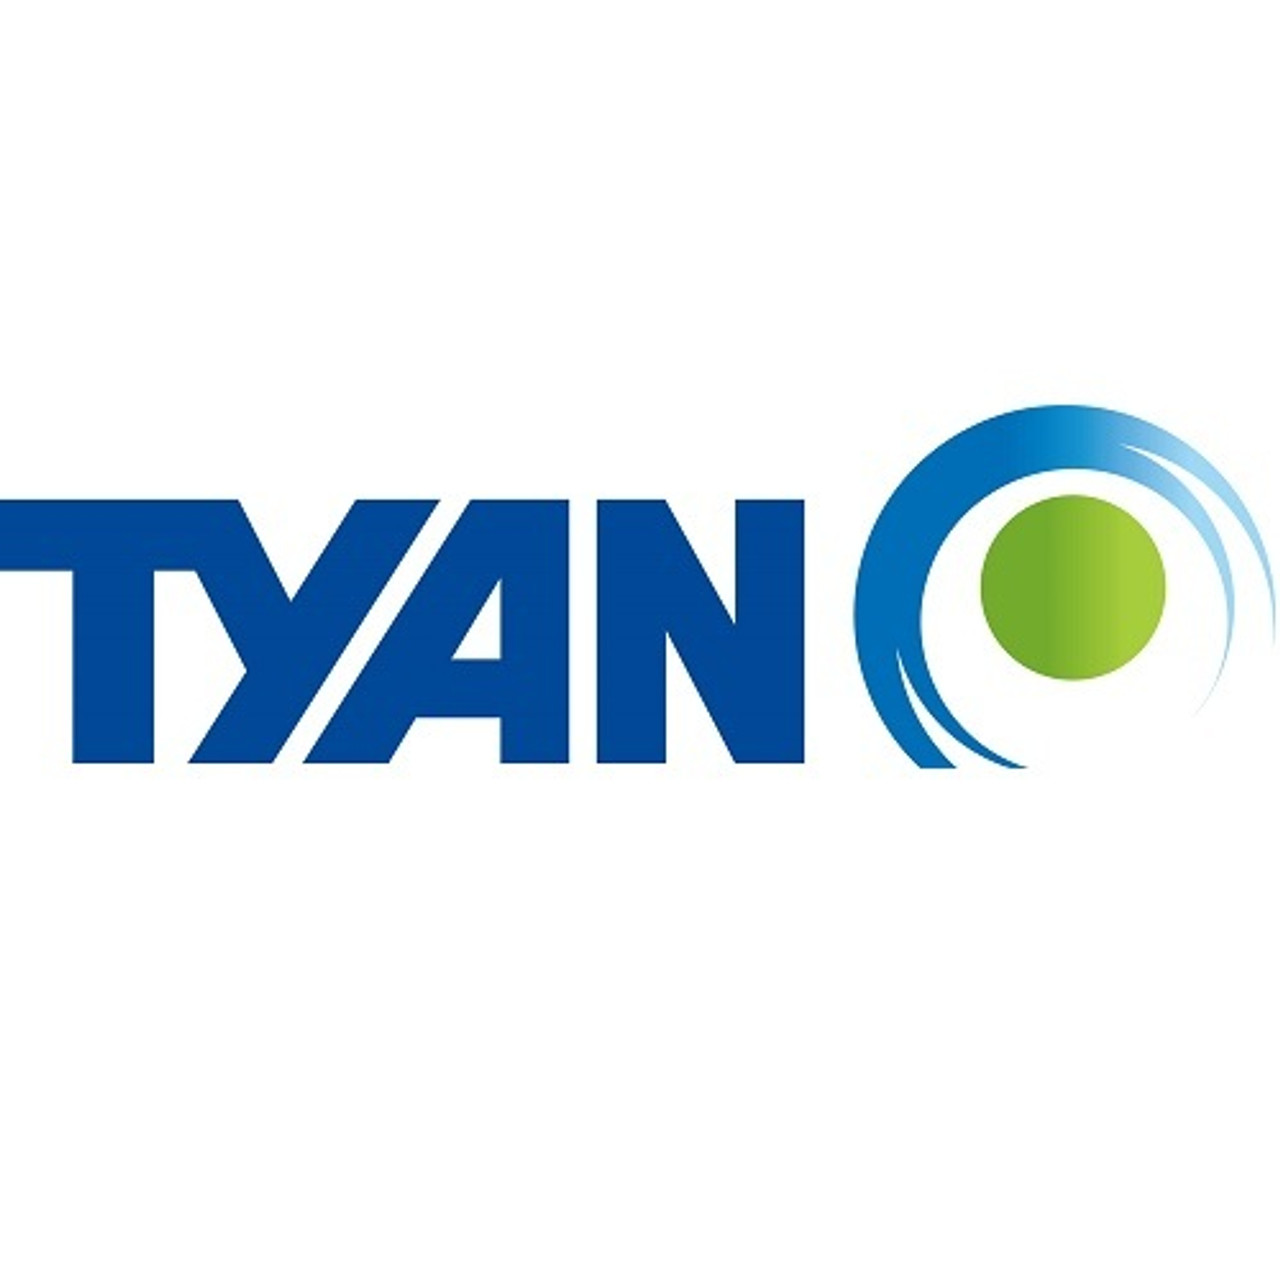 Tyan Intel (2) 5520 / ICH10R,Supports up to 2 Intel Xeon 5500/ 5600 Series Processor,9+9 DIMM slots supports up to 144GB at launch w/ dual rank RDIMMs,up to 2 -2.5inch fixed HDDs